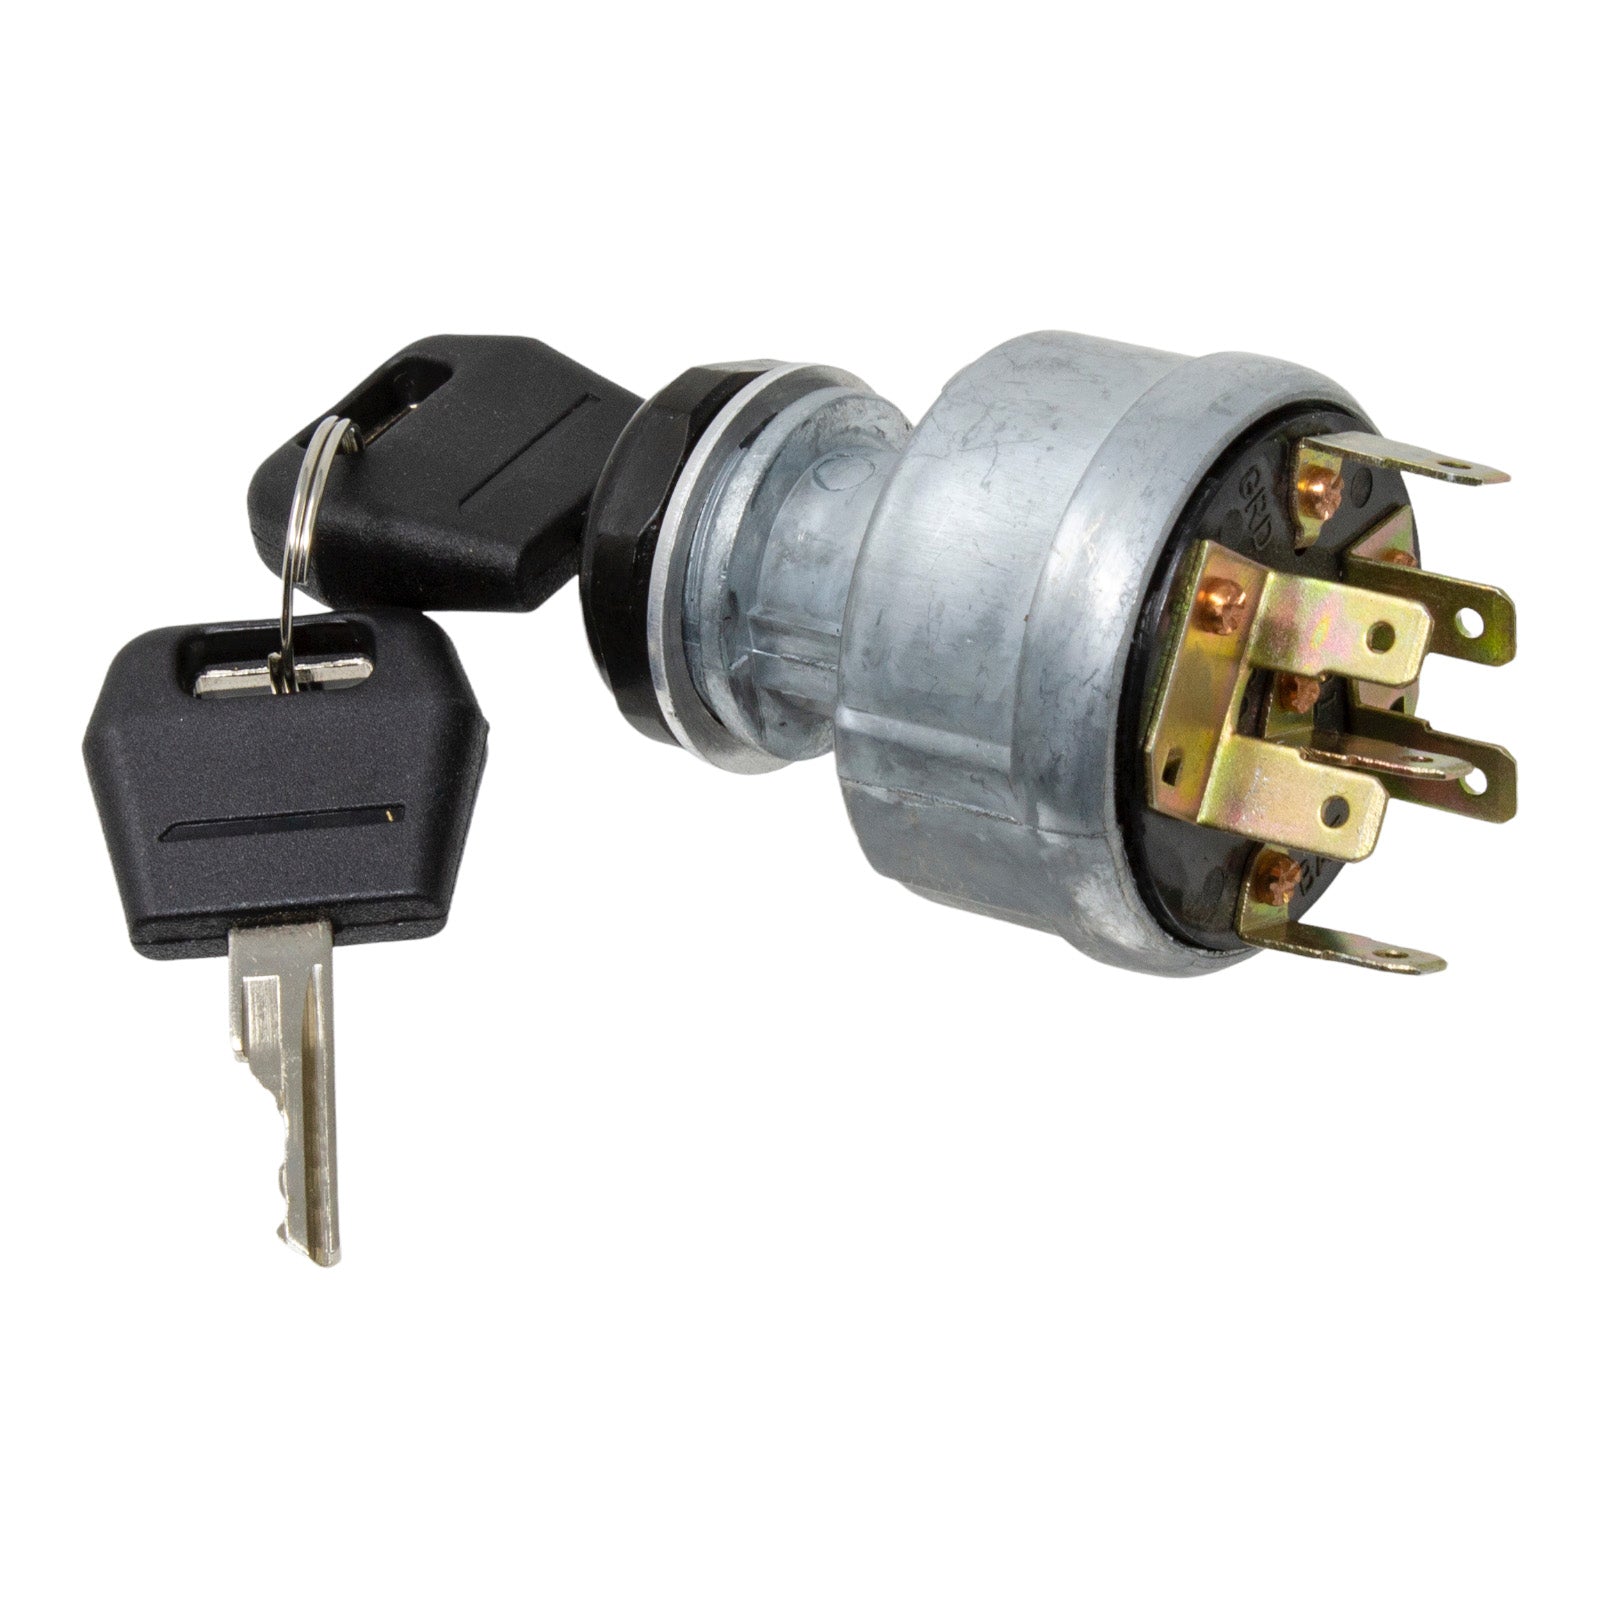 Duraforce L77723, Ignition Switch For Case IH